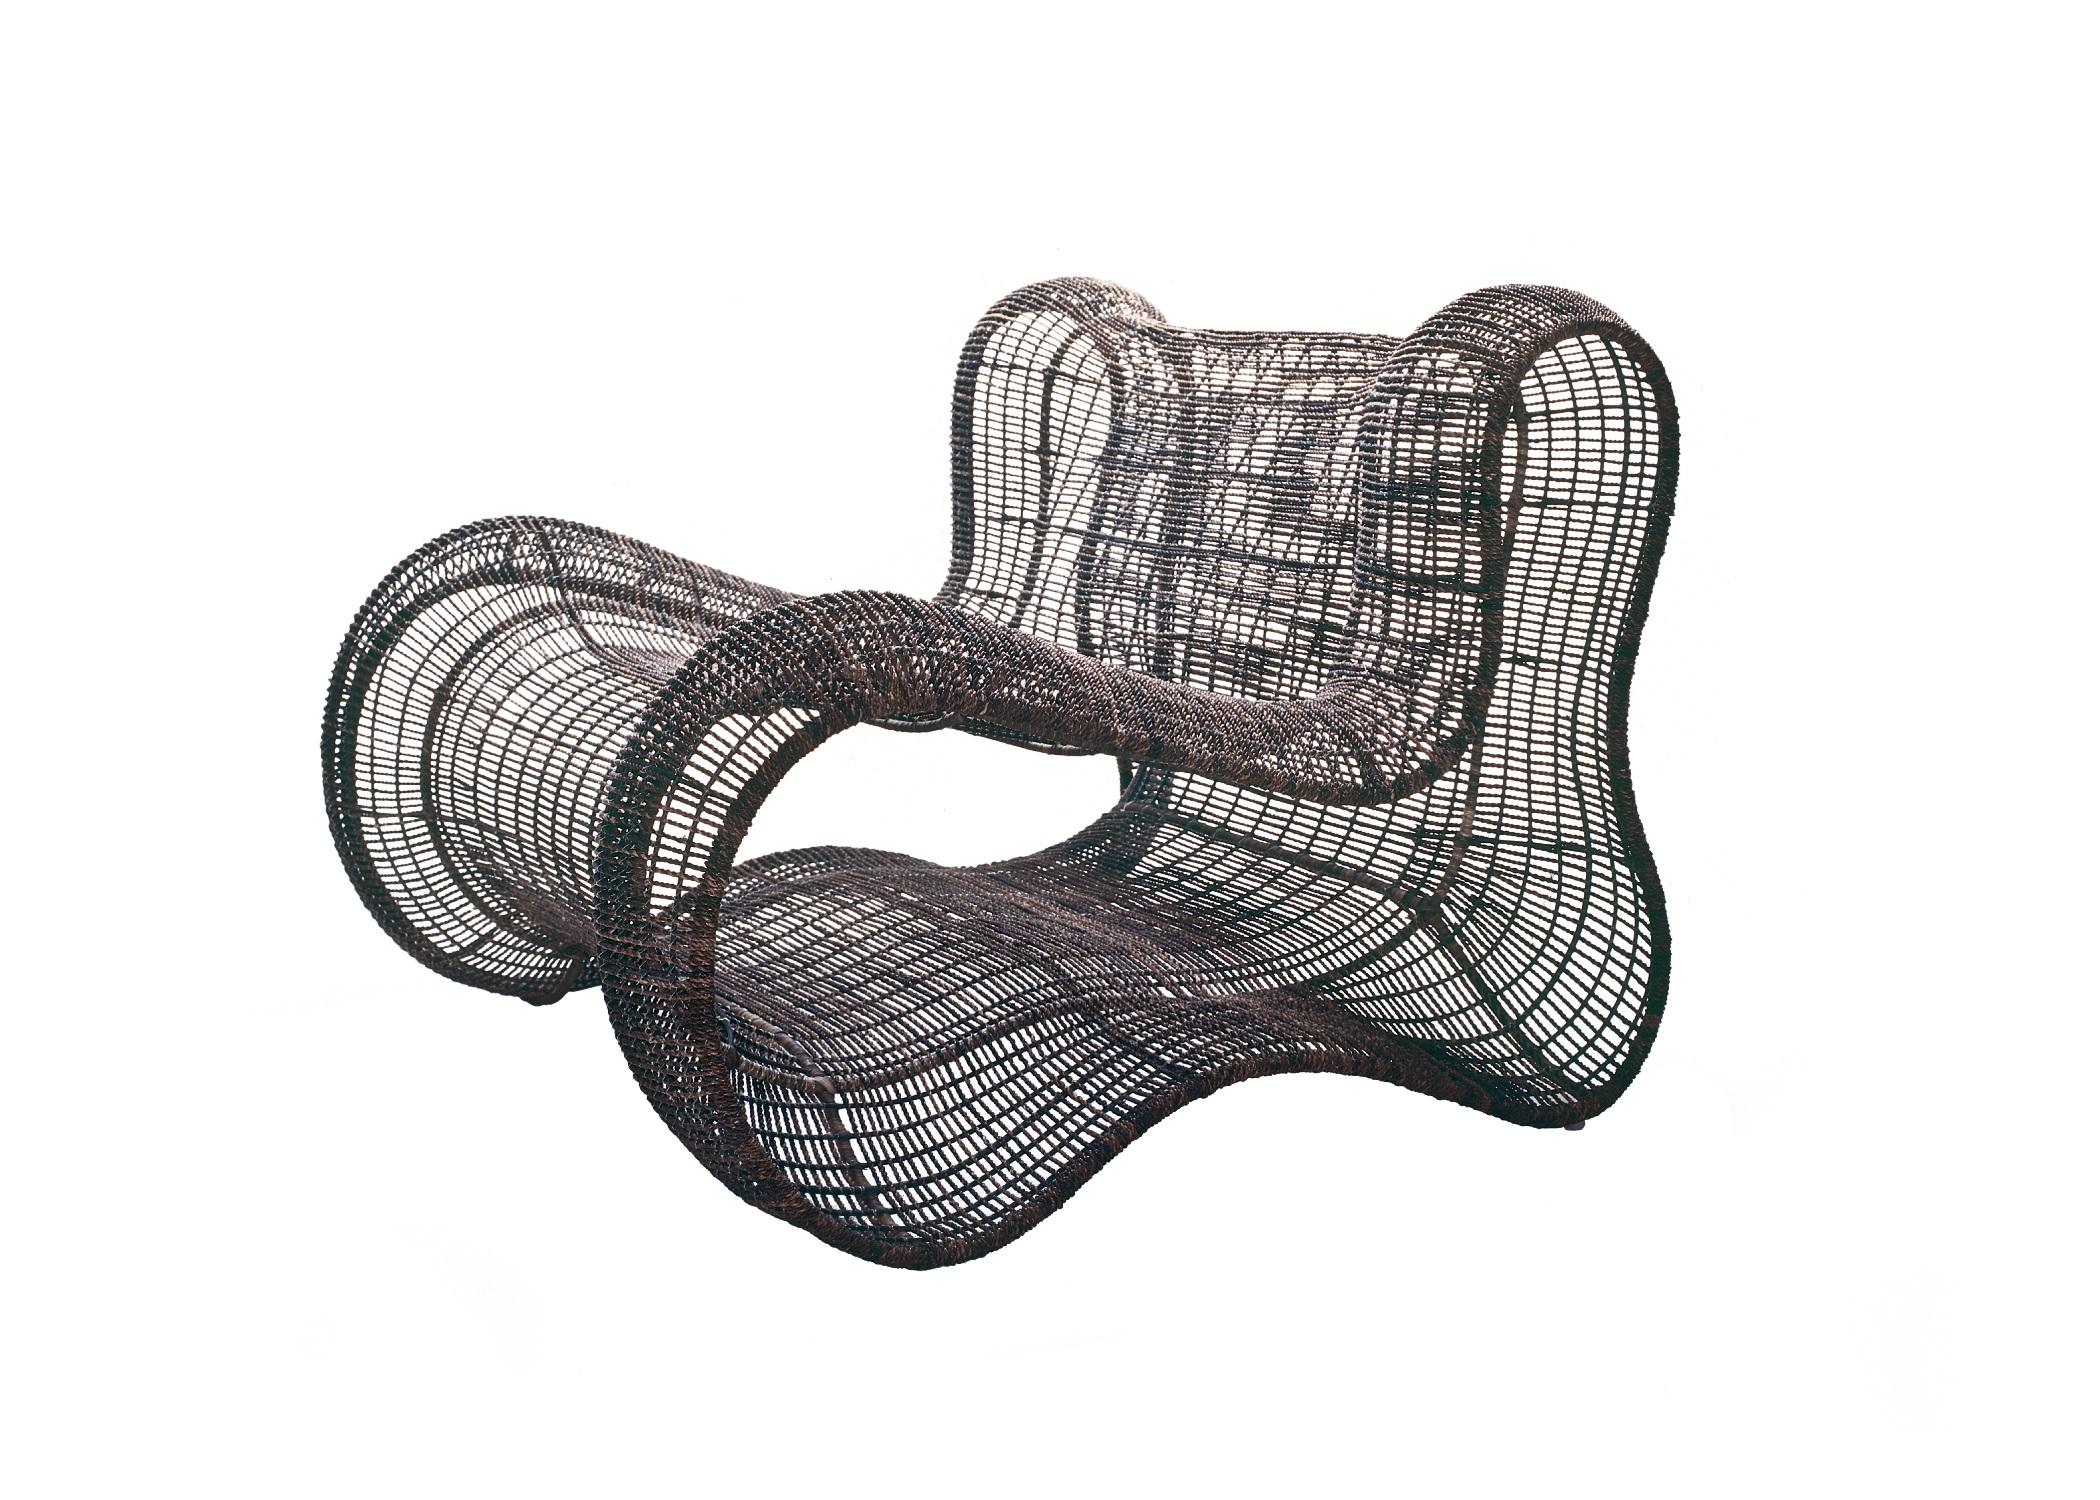 Outdoor pigalle easy armchair by Kenneth Cobonpue.
Materials: Polyethelene, Steel. 
Also available in other colors and for indoors. Prices for upholstery and fabric upon request.
Dimensions: 100 cm x 97 cm x H 77.5 cm 

Experience the